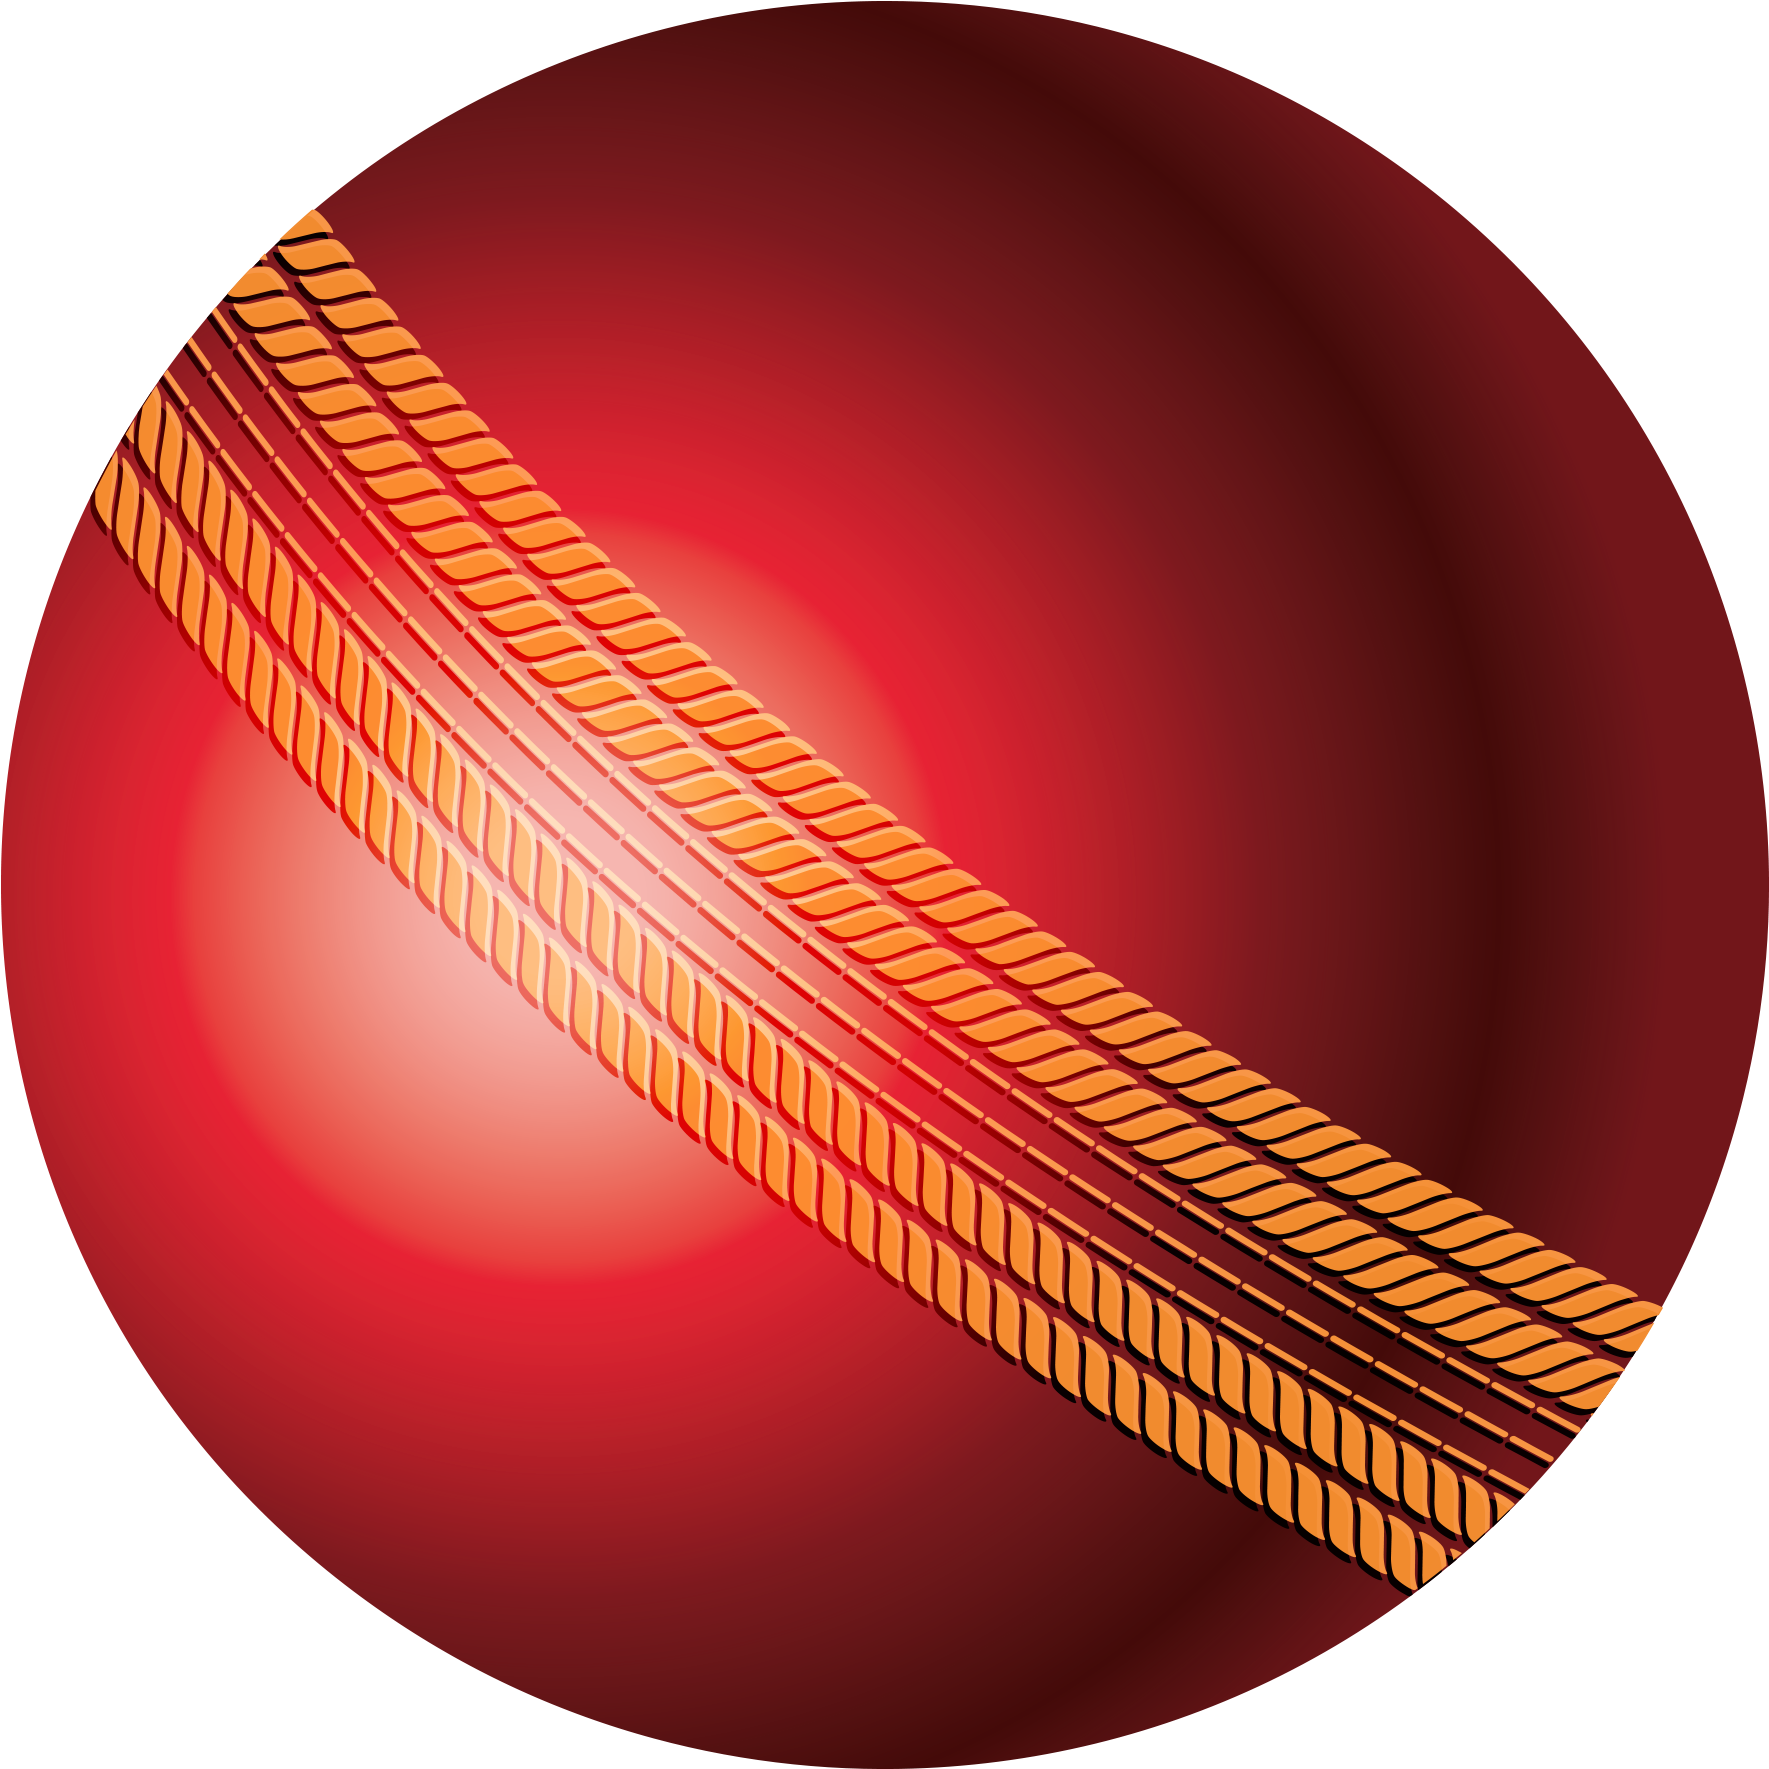 Cricket Ball Design Graphic PNG